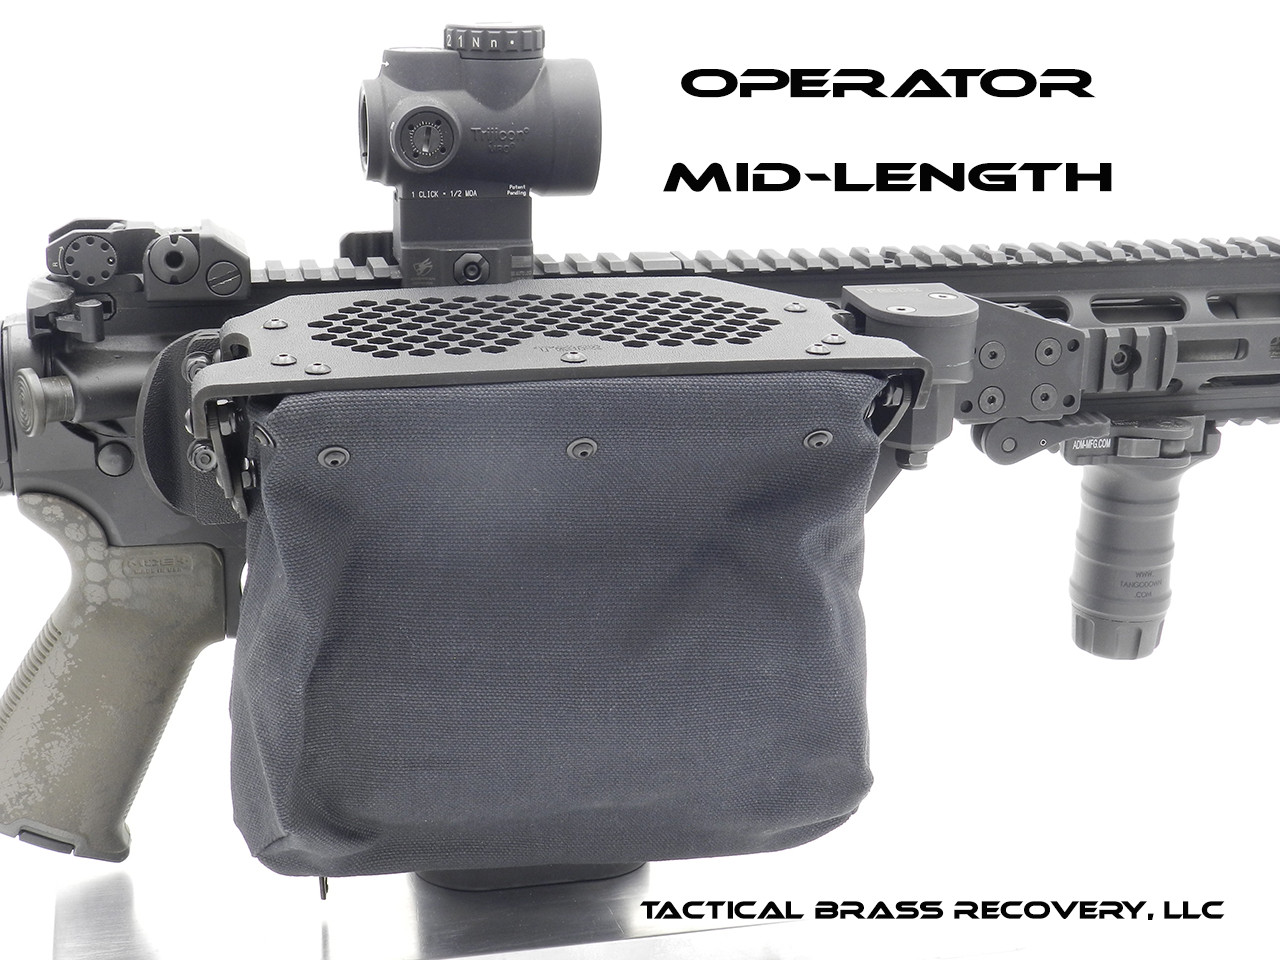 Seven Ops Brass Catcher,Tactical Shell Catcher for Rifle Range  Shooting,Saves Brass for Re-Loading (Black) in Dubai - UAE